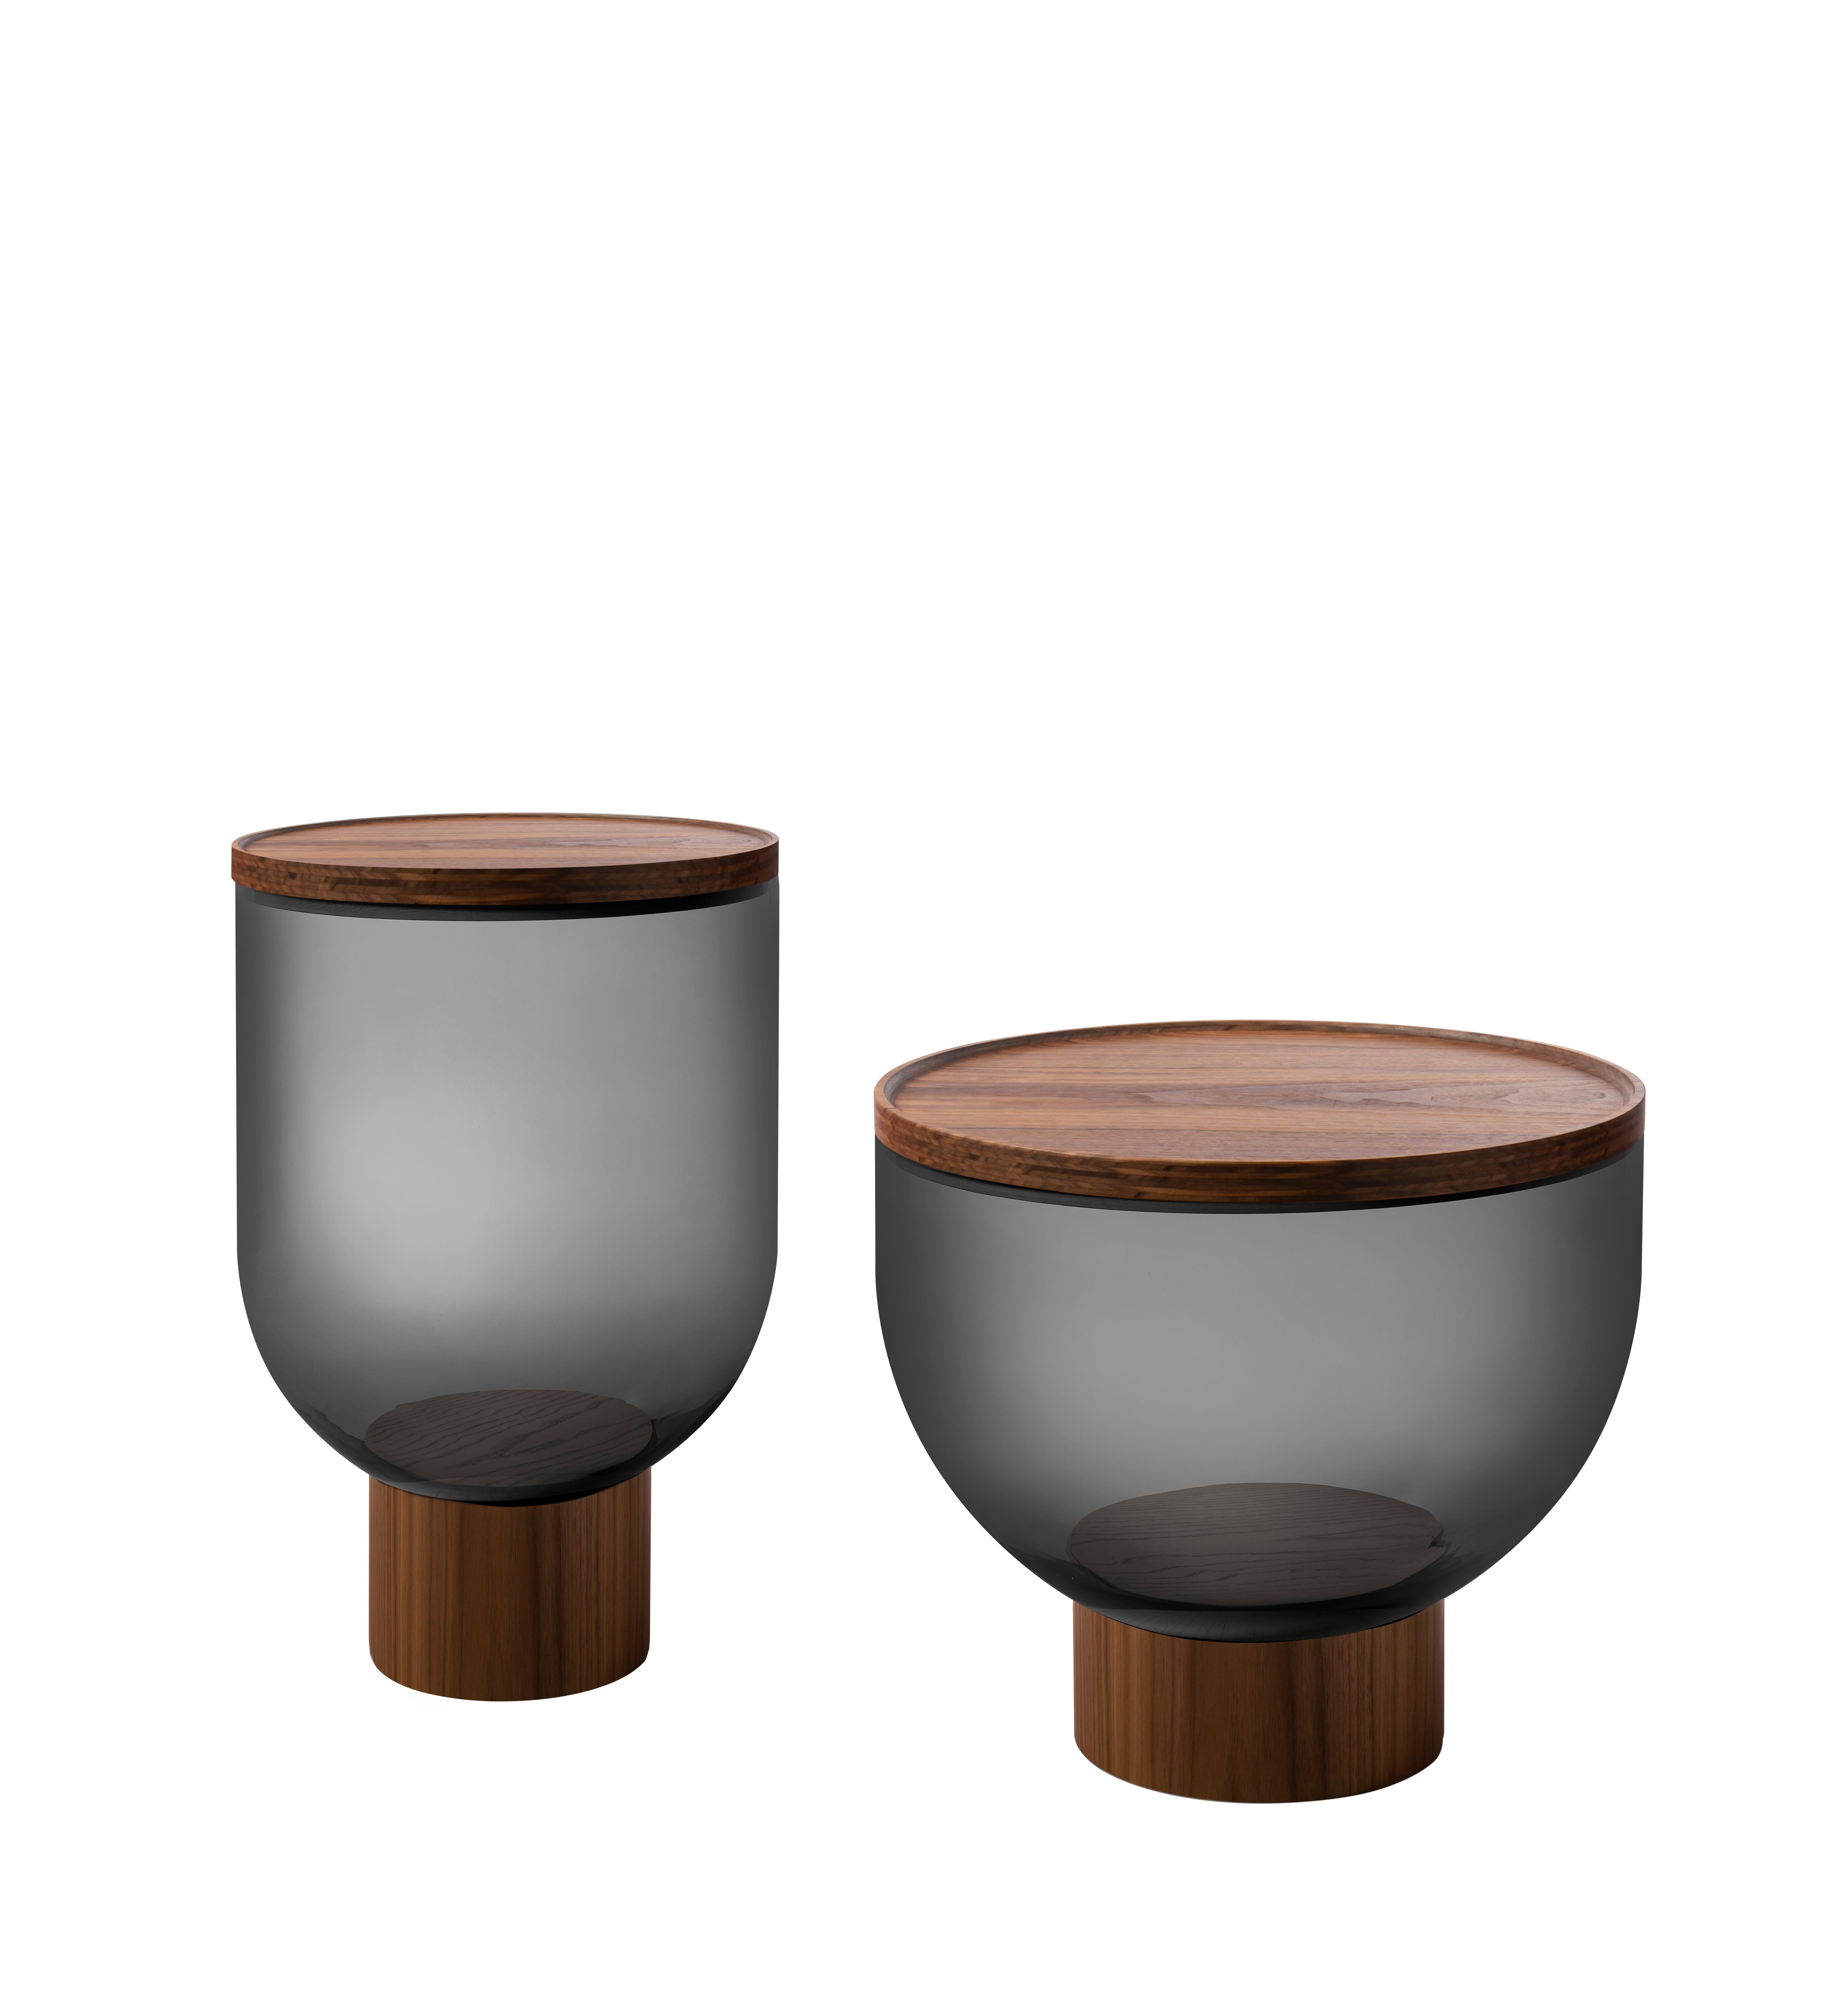 This low coffee and side-table comes with a base and top in Canaletto walnut, natural ash, ash stained black, intense blue or anthracite. The structure's body is made out of blown Murano glass, available in amber, blue-grey or smoke grey. Here you